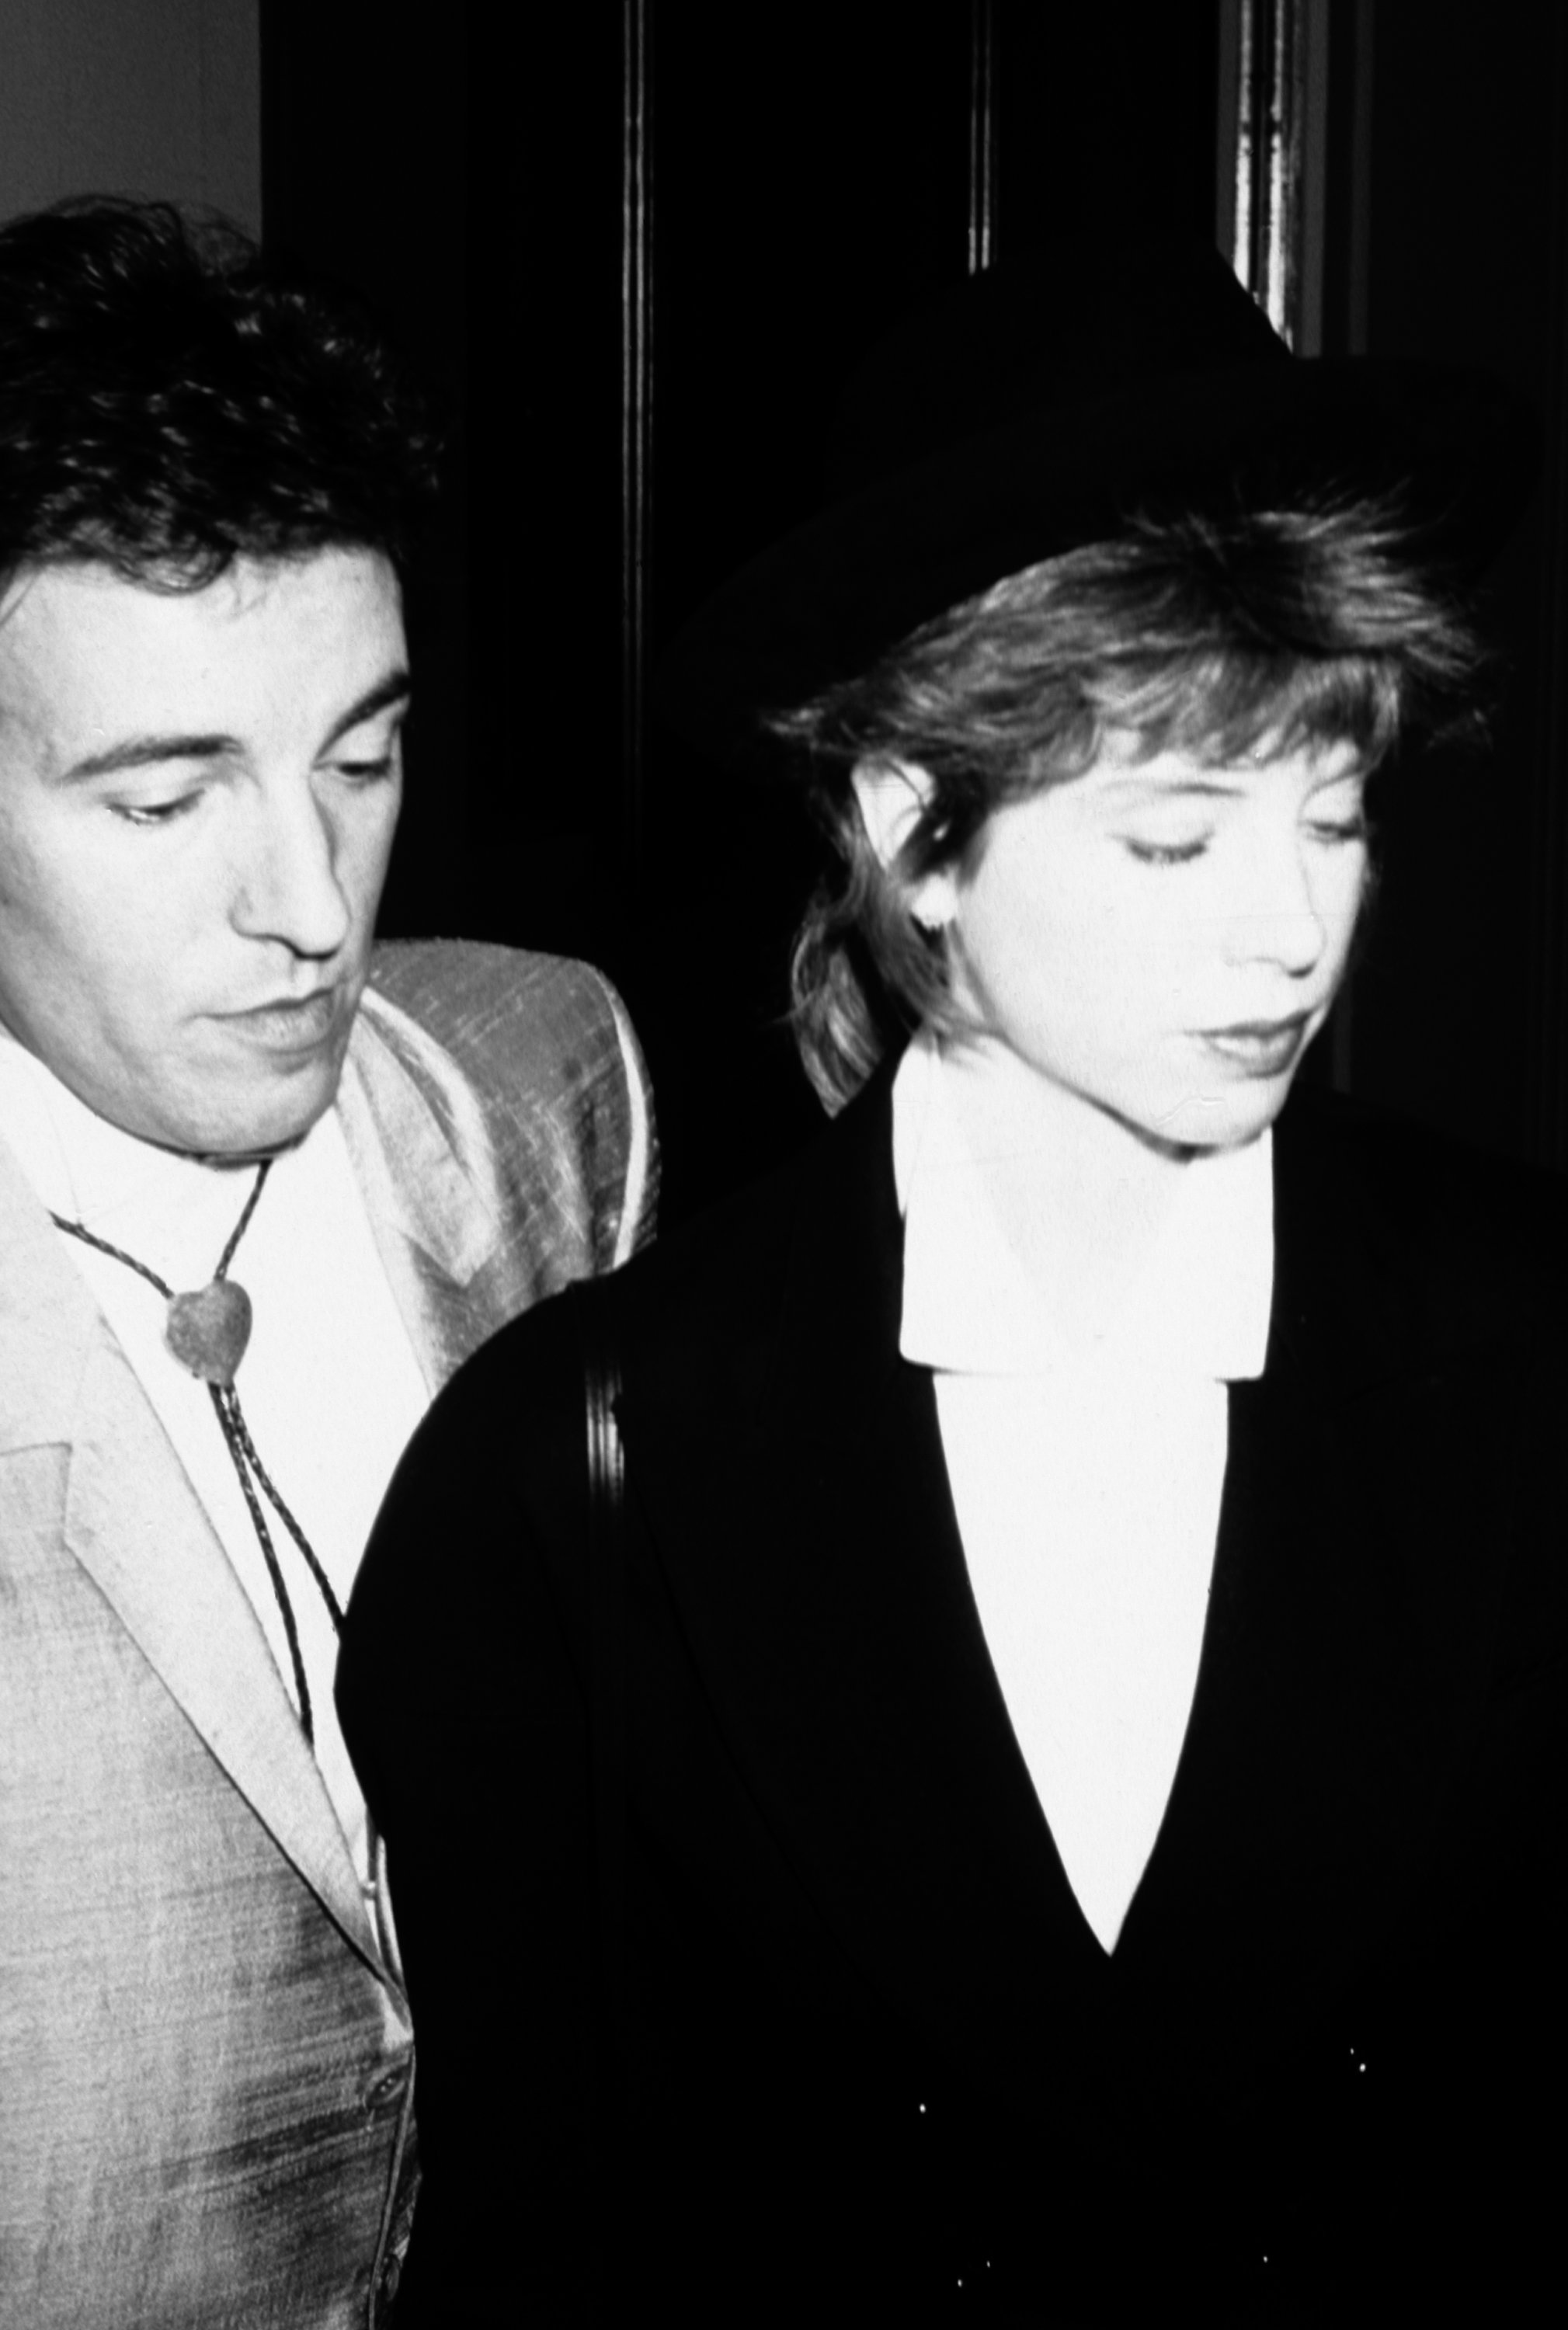 Bruce Springsteen and actress Julianne Phillips attending Second Annual Rock N Roll Hall of Fame Awards at the Waldorf Astoria Hotel on January 21, 1987 in New York City. | Source: Getty Images